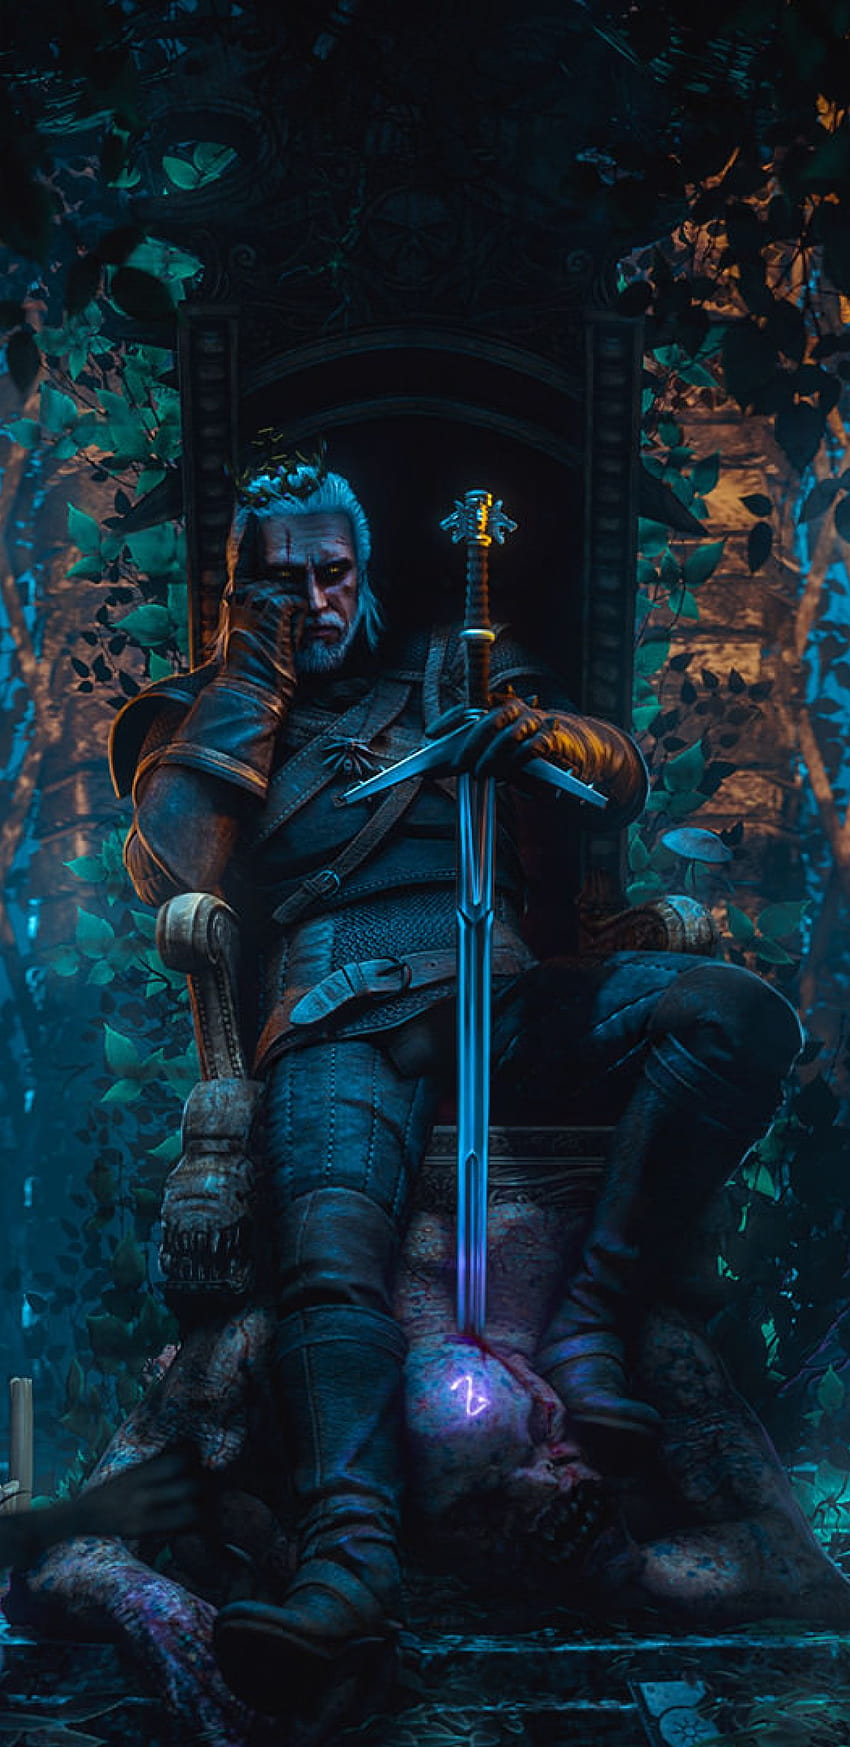 1440x2960 Geralt Of Rivia The Witcher 3 Samsung Galaxy Note 9,8, S9,S8,S Q , Games , and Backgrounds, the witcher android HD phone wallpaper